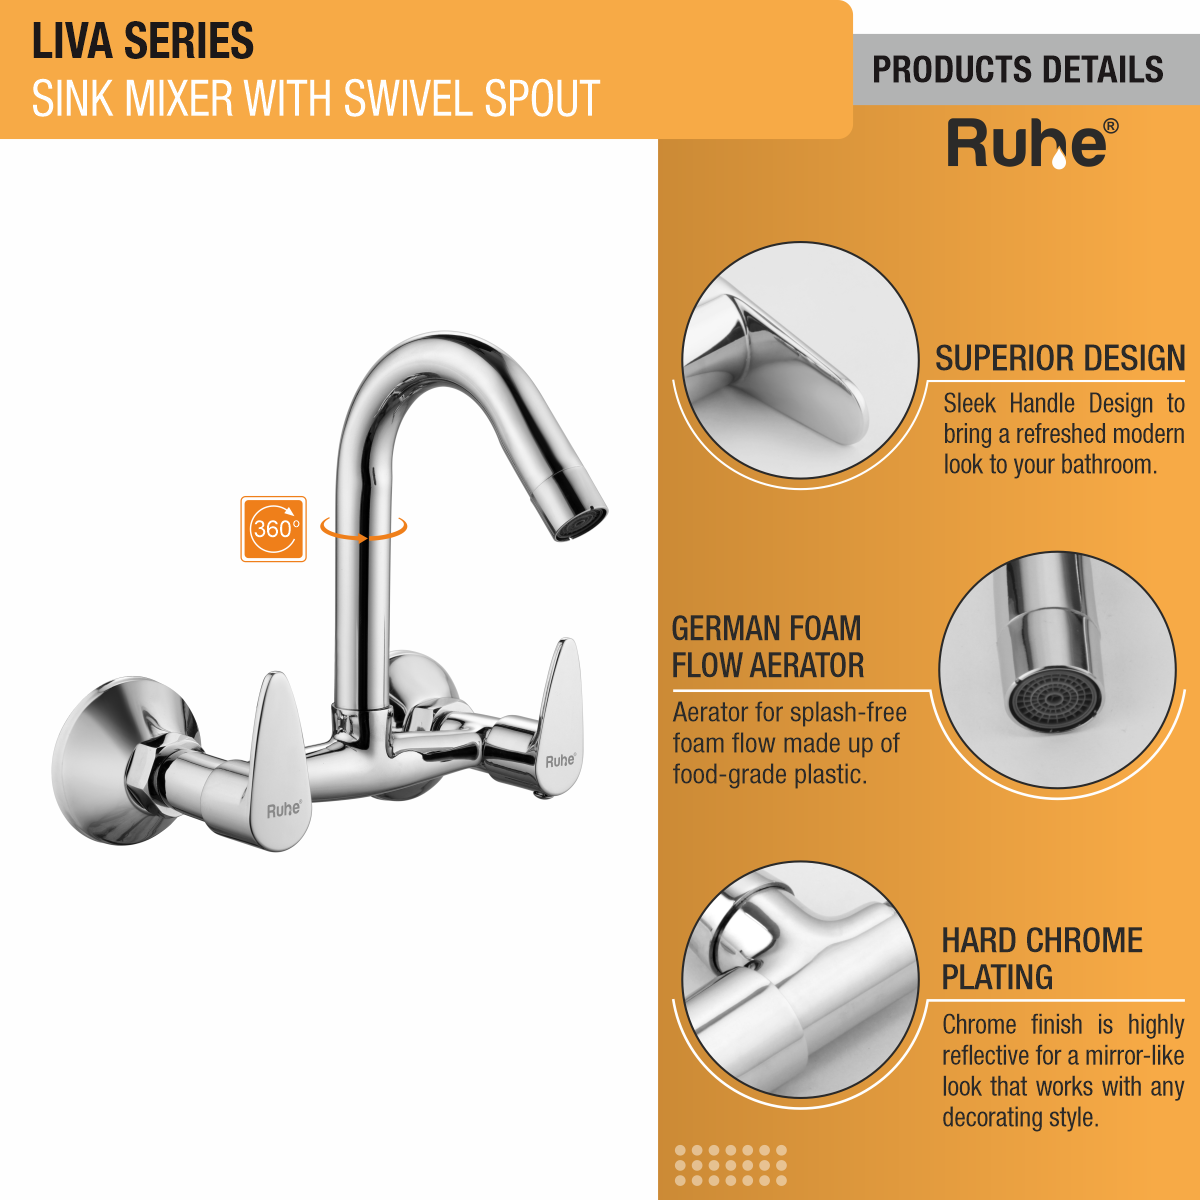 Liva Sink Mixer with Small (12 inches) Round Swivel Spout Faucet product details